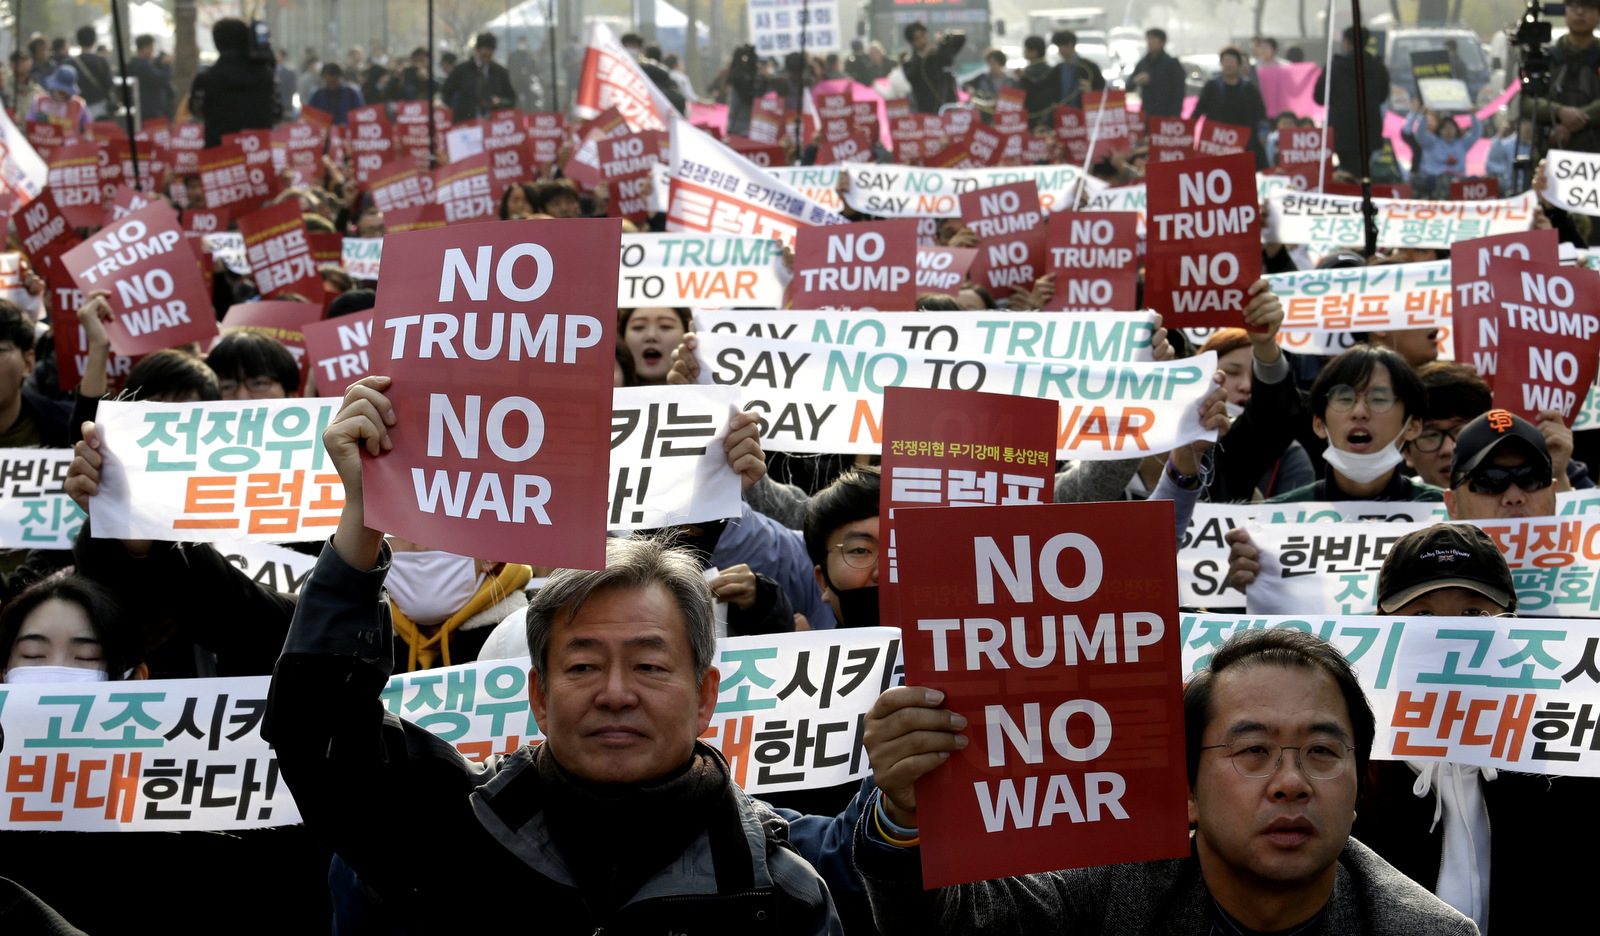 Protesters stage a rally to oppose the visit by U.S. President Donald Trump in front of the National Assembly in Seoul, South Korea, Nov. 8, 2017. (AP/Ahn Young-joon)